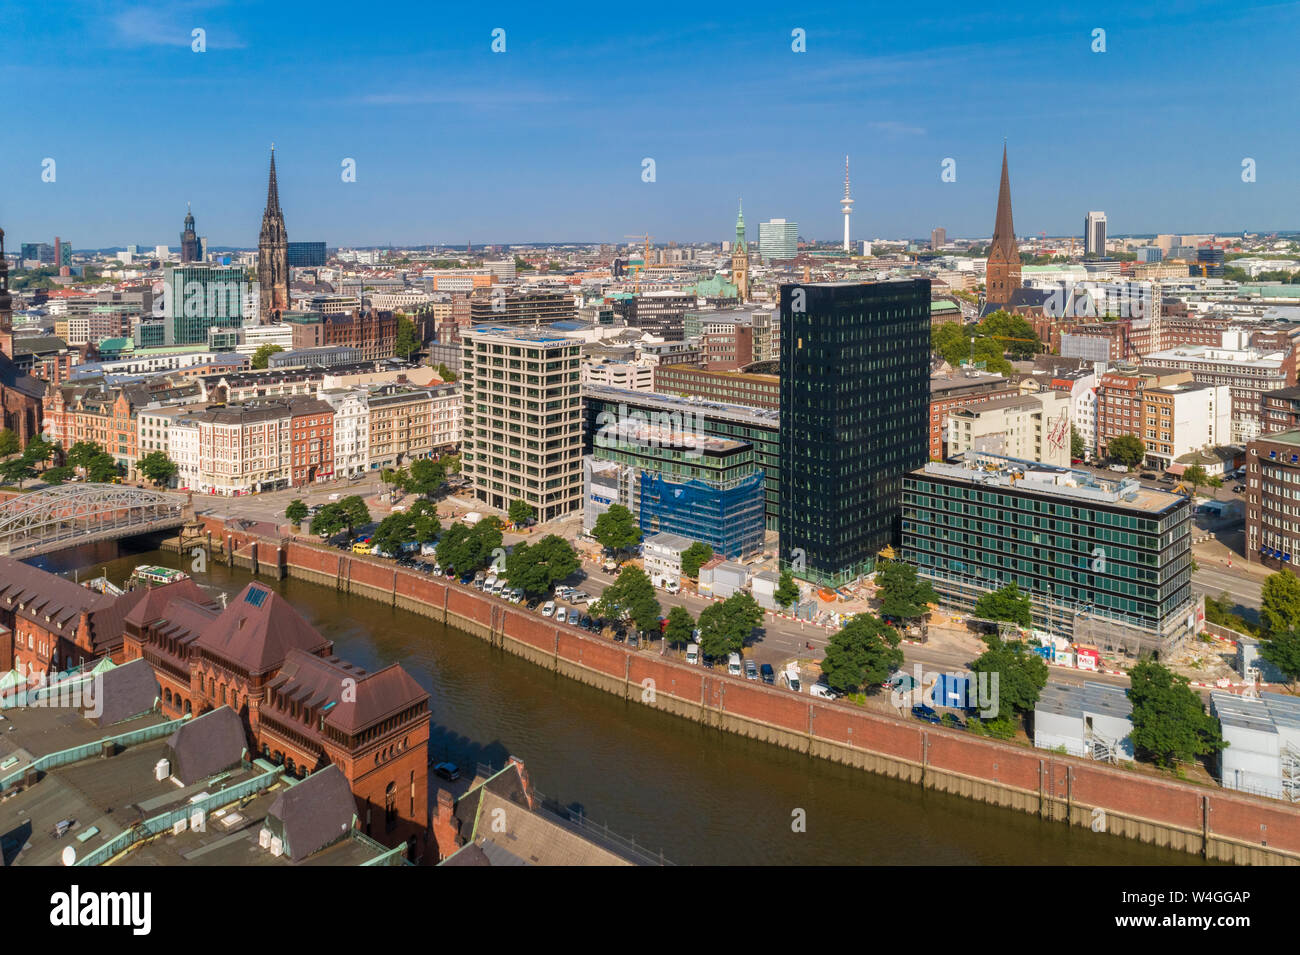 Cityscape with old town and new town, Hamburg, Germany Stock Photo